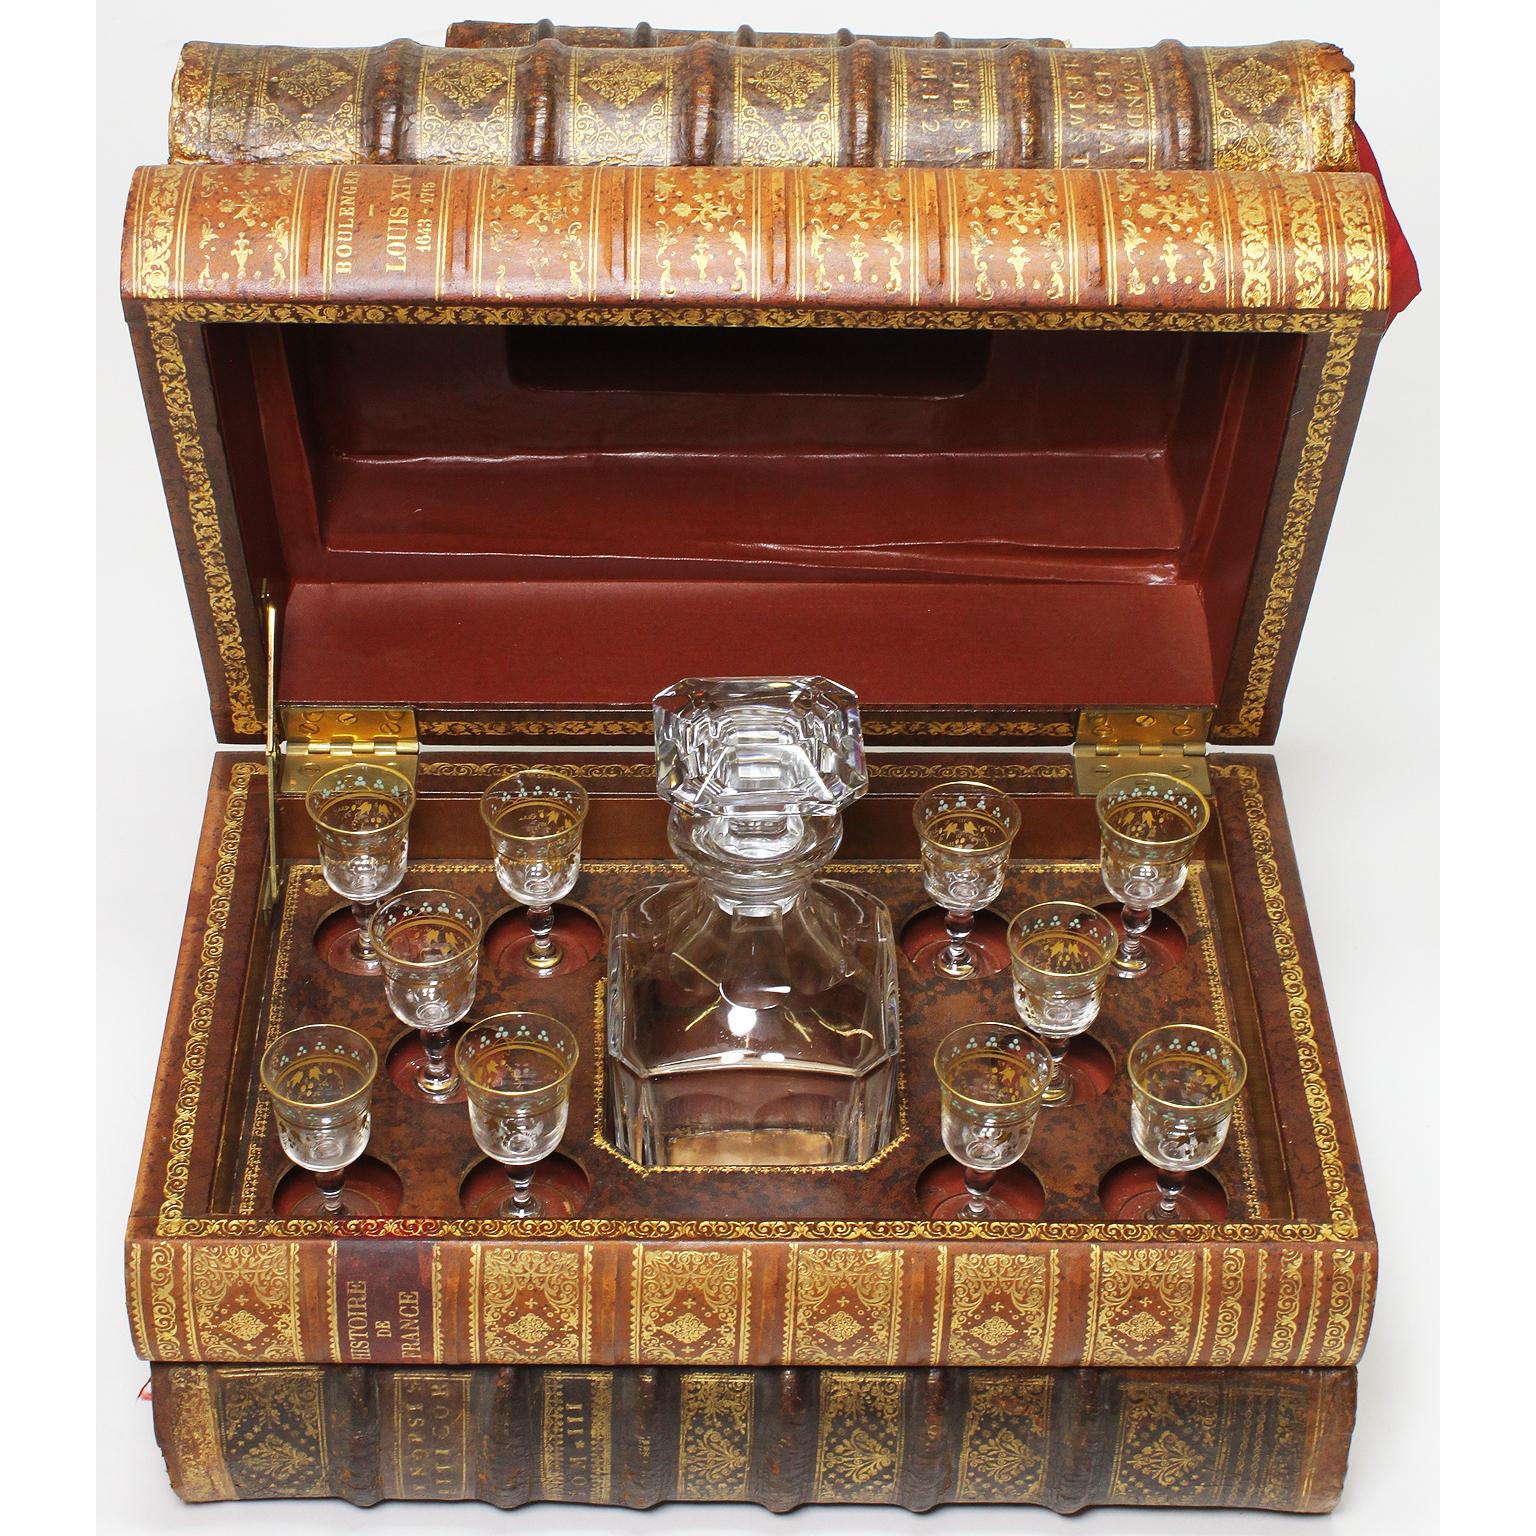 A fine French 19th century Tantalus Baccarat crystal decanter - liquor box - casket in the form of 'Stacked Leather Faux Books'. The five finely gilt-embossed leather-bound 'Period Style' books concealing an assembled set of ten later crystal and